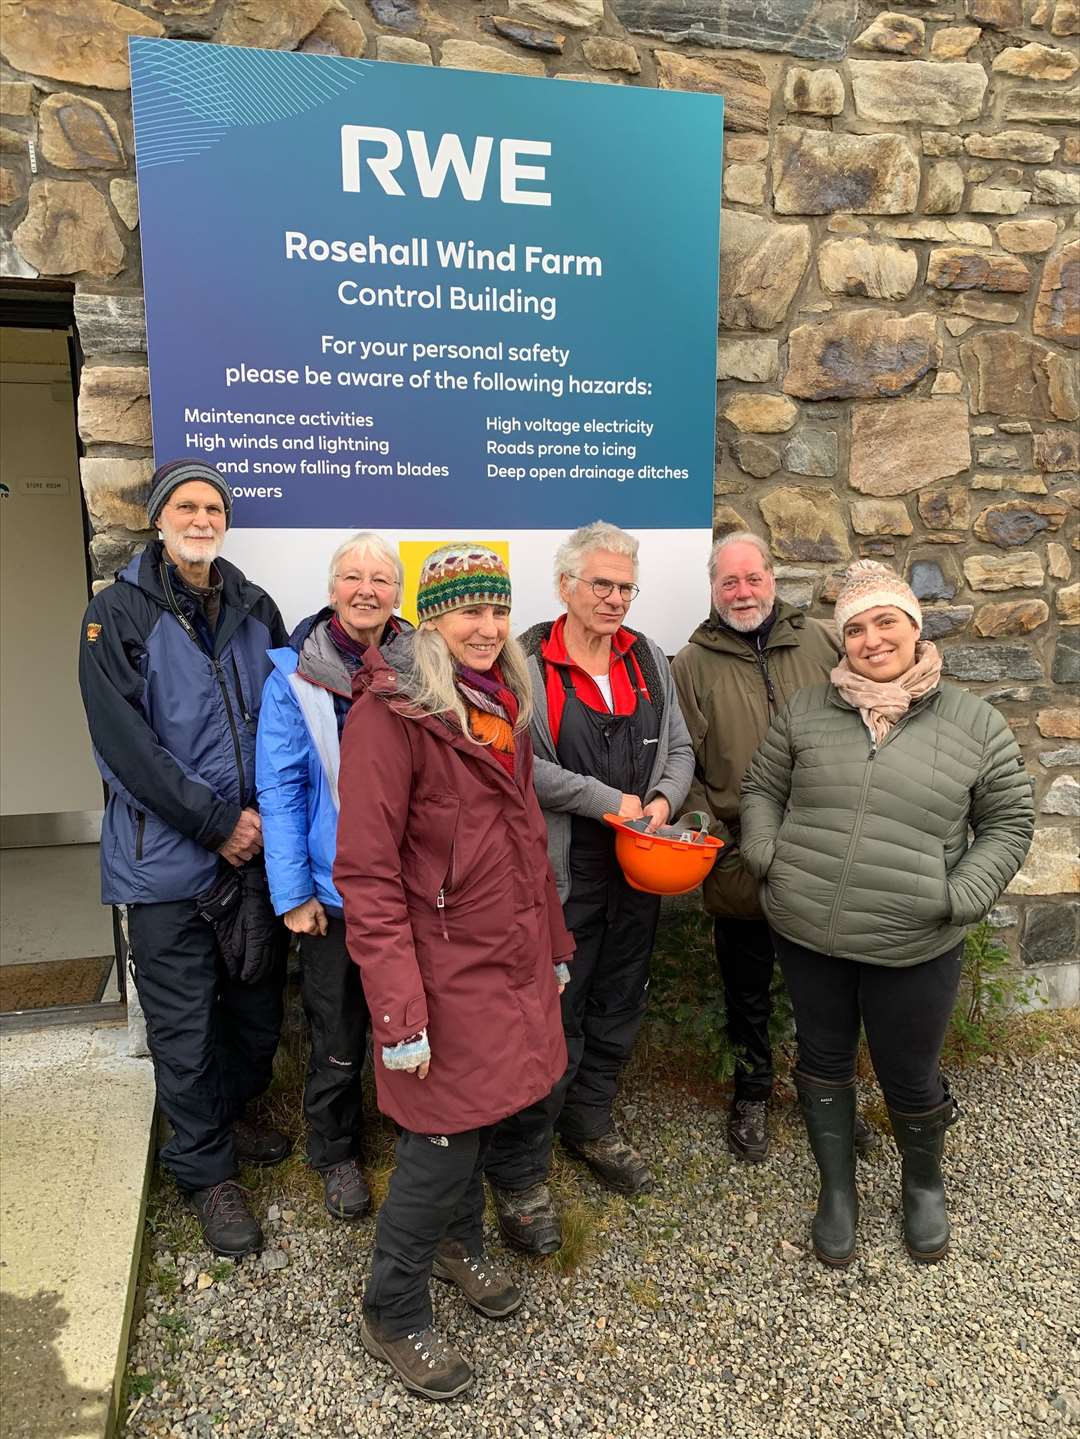 Panel members at the entrance to the control building at Rosehall Wind Farm. From left, Phil Olsen, Marion Turner, Betty Wright, Andy Wright, David Hannah and Silvia Muras Sanmartin.